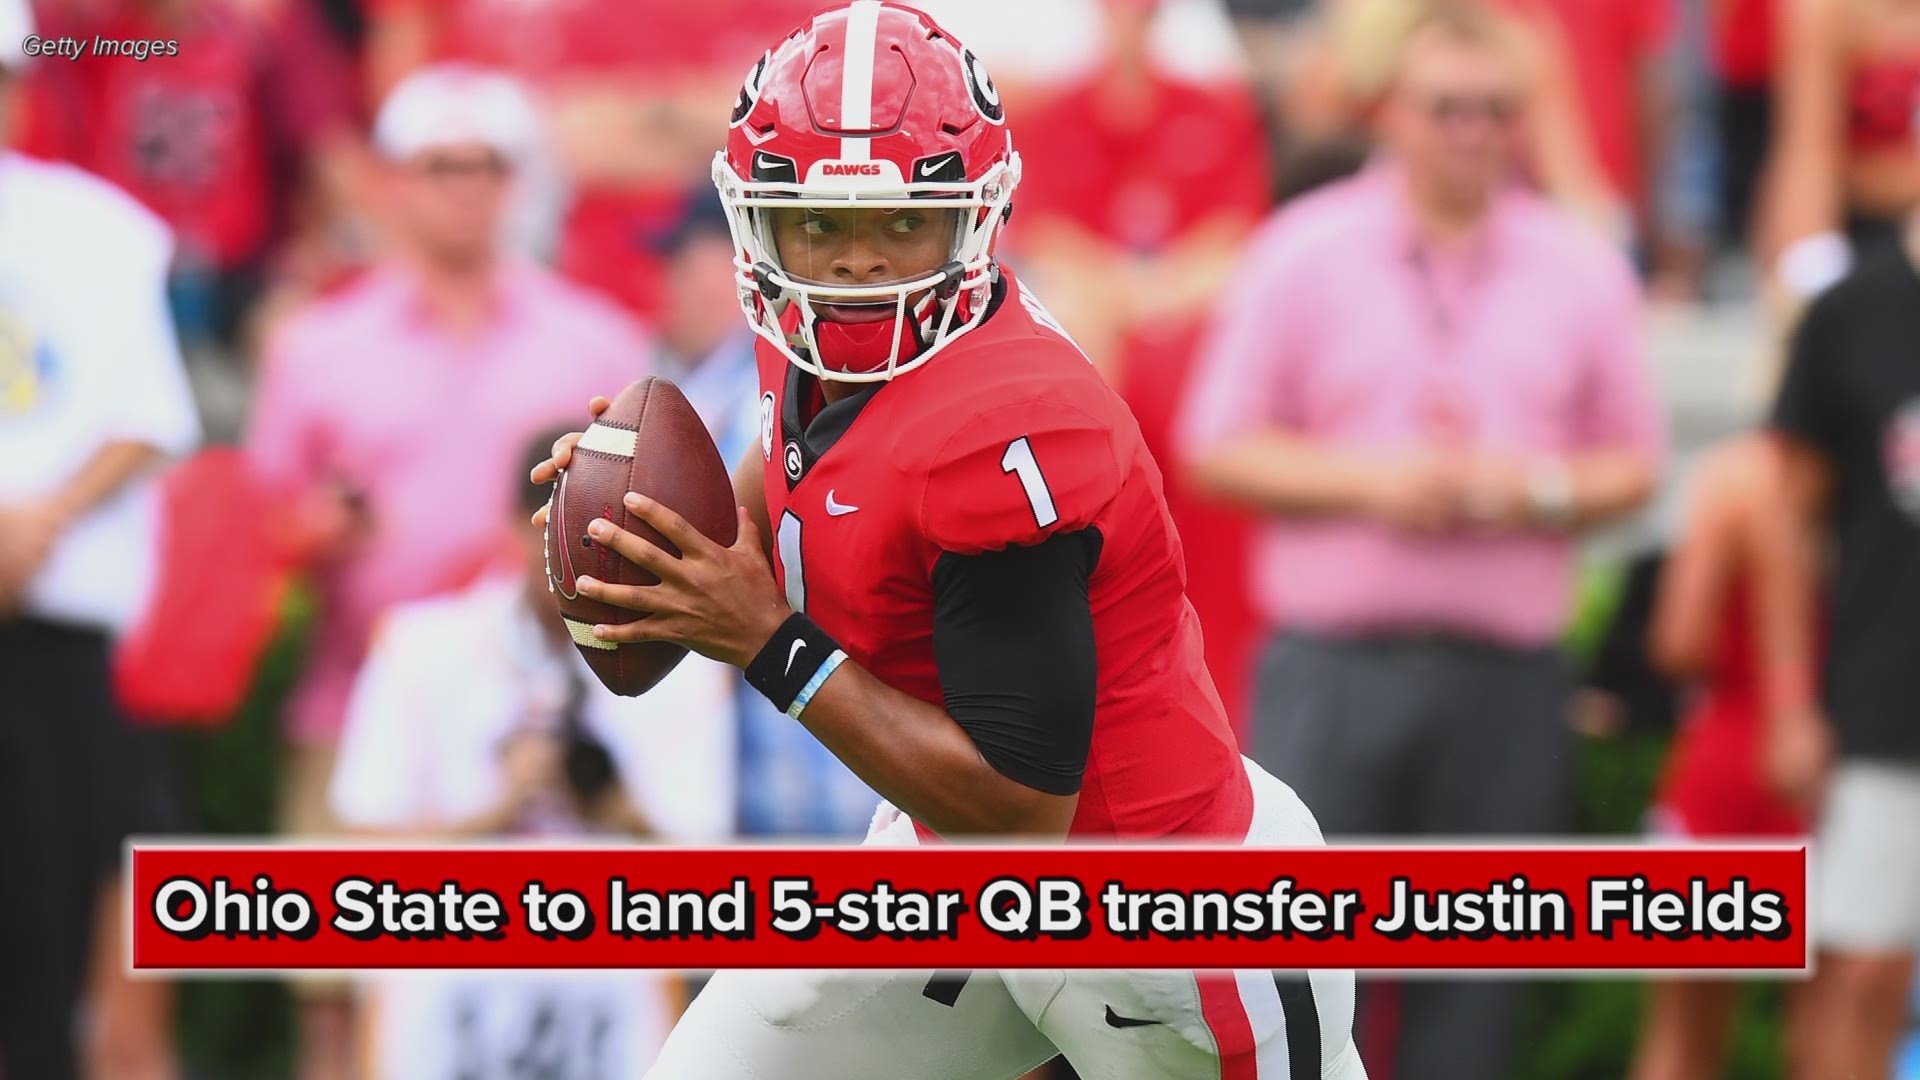 According to Letterman Row, Georgia transfer Justin Fields will enroll at Ohio State this weekend.